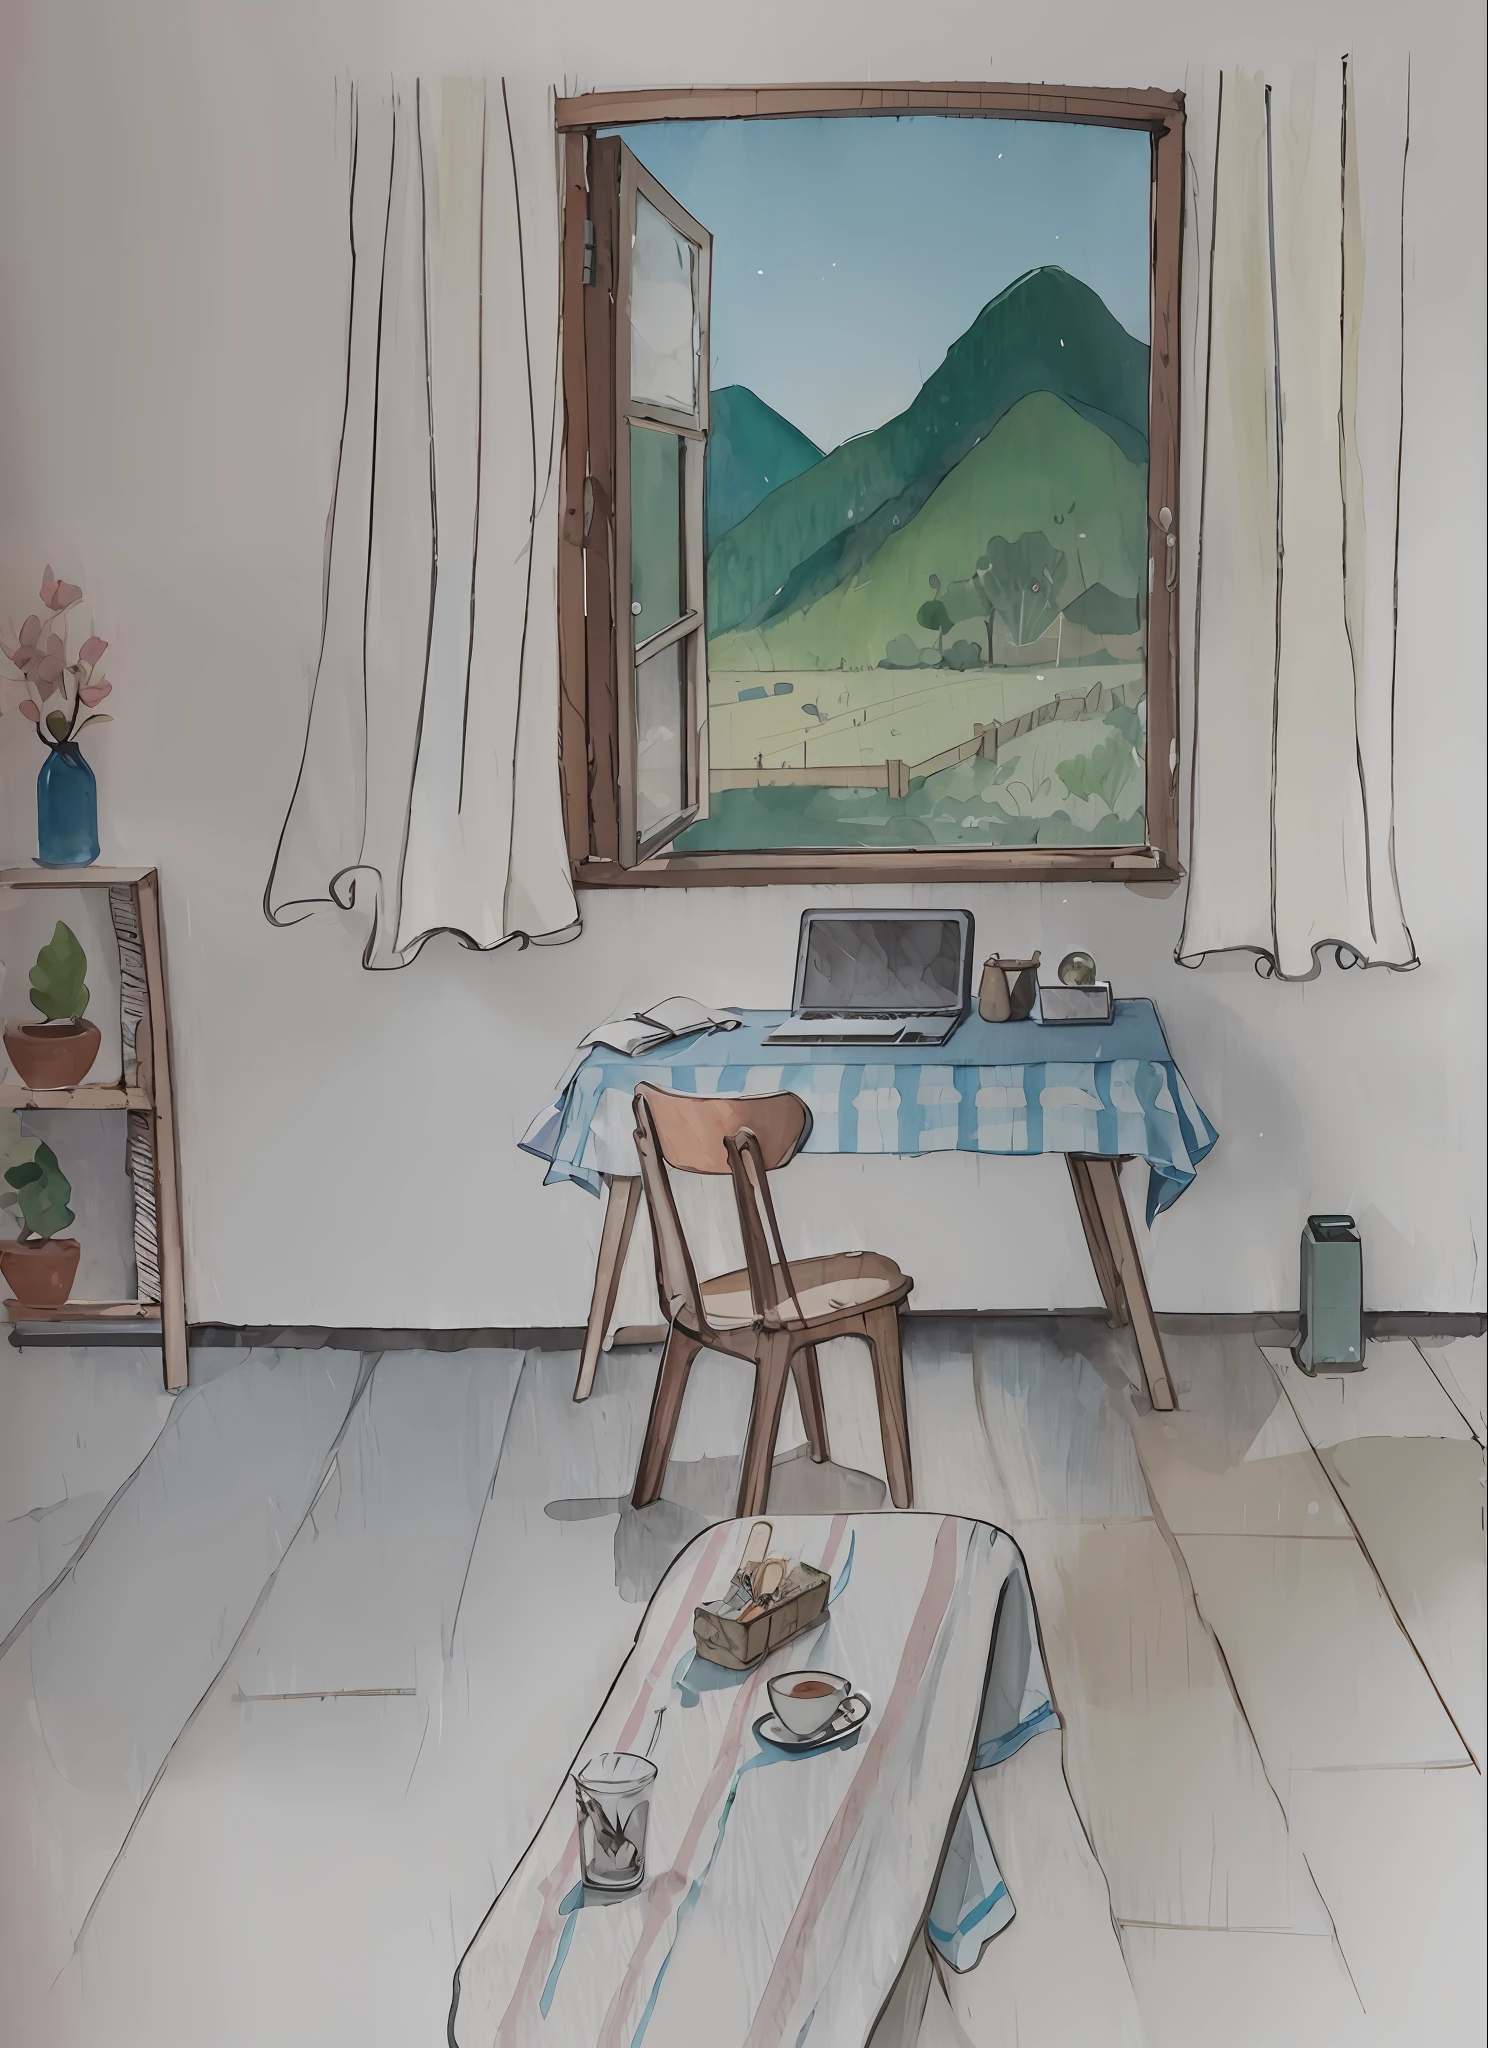 there is a room with a table and a window, a room, sitting in rural living room, apartment of an art student, aquarel painting, studio landscape, detailed digital painting inspired by Harriet Backer, cozy place, an interior of room, indoor scene, digital art, stable diffusion, afternoon hangout